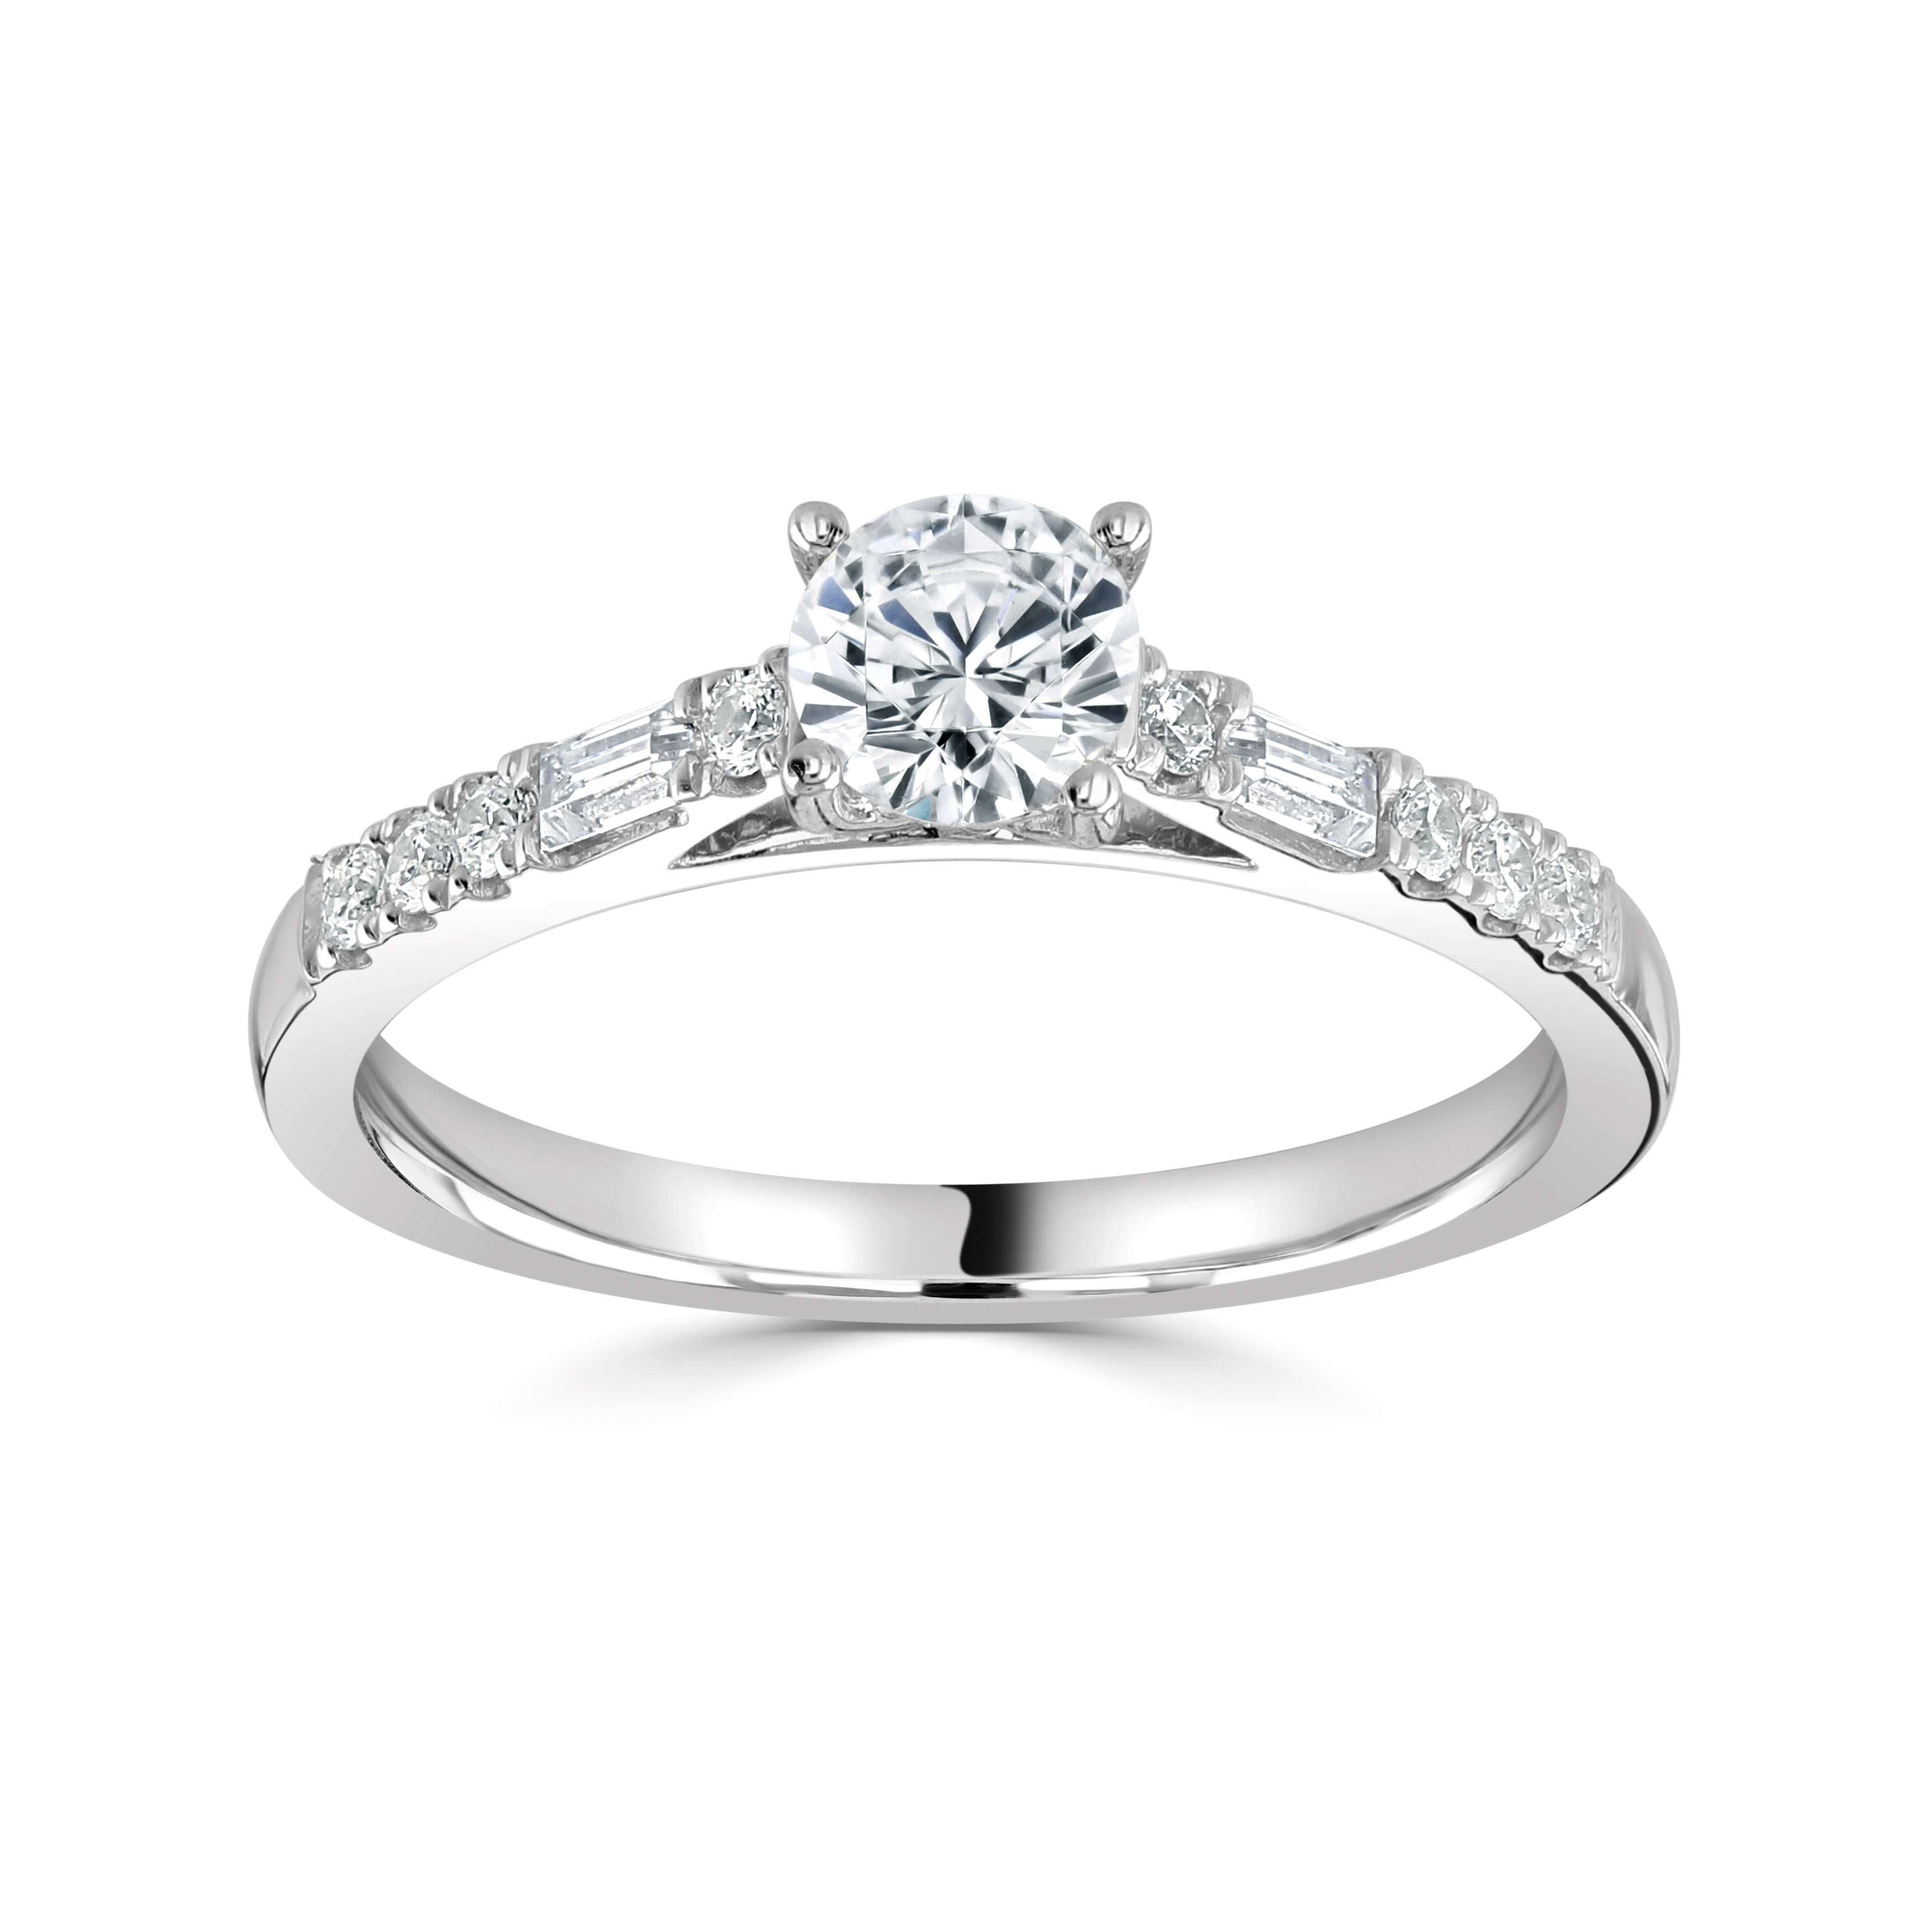 Haley *Select a Round Diamond 0.25ct or above